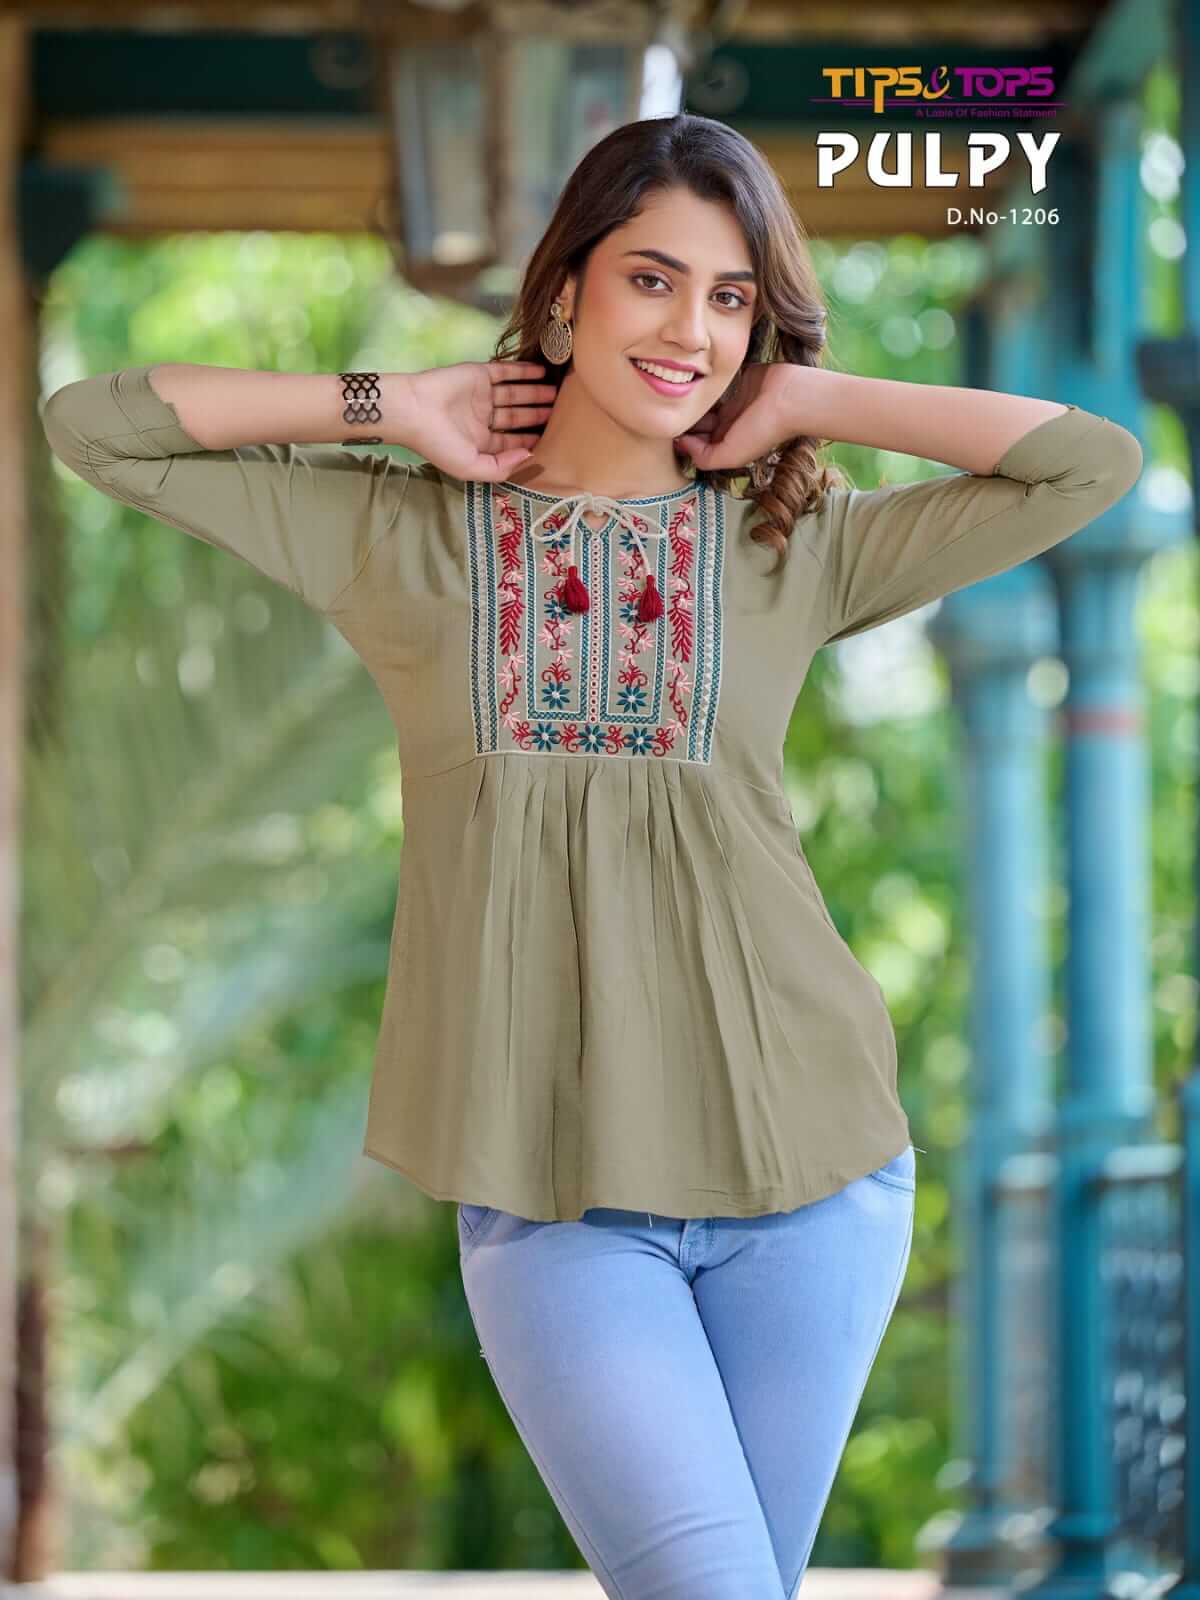 Tips Tops Pulpy vol 12 Ladies Tops collection 5